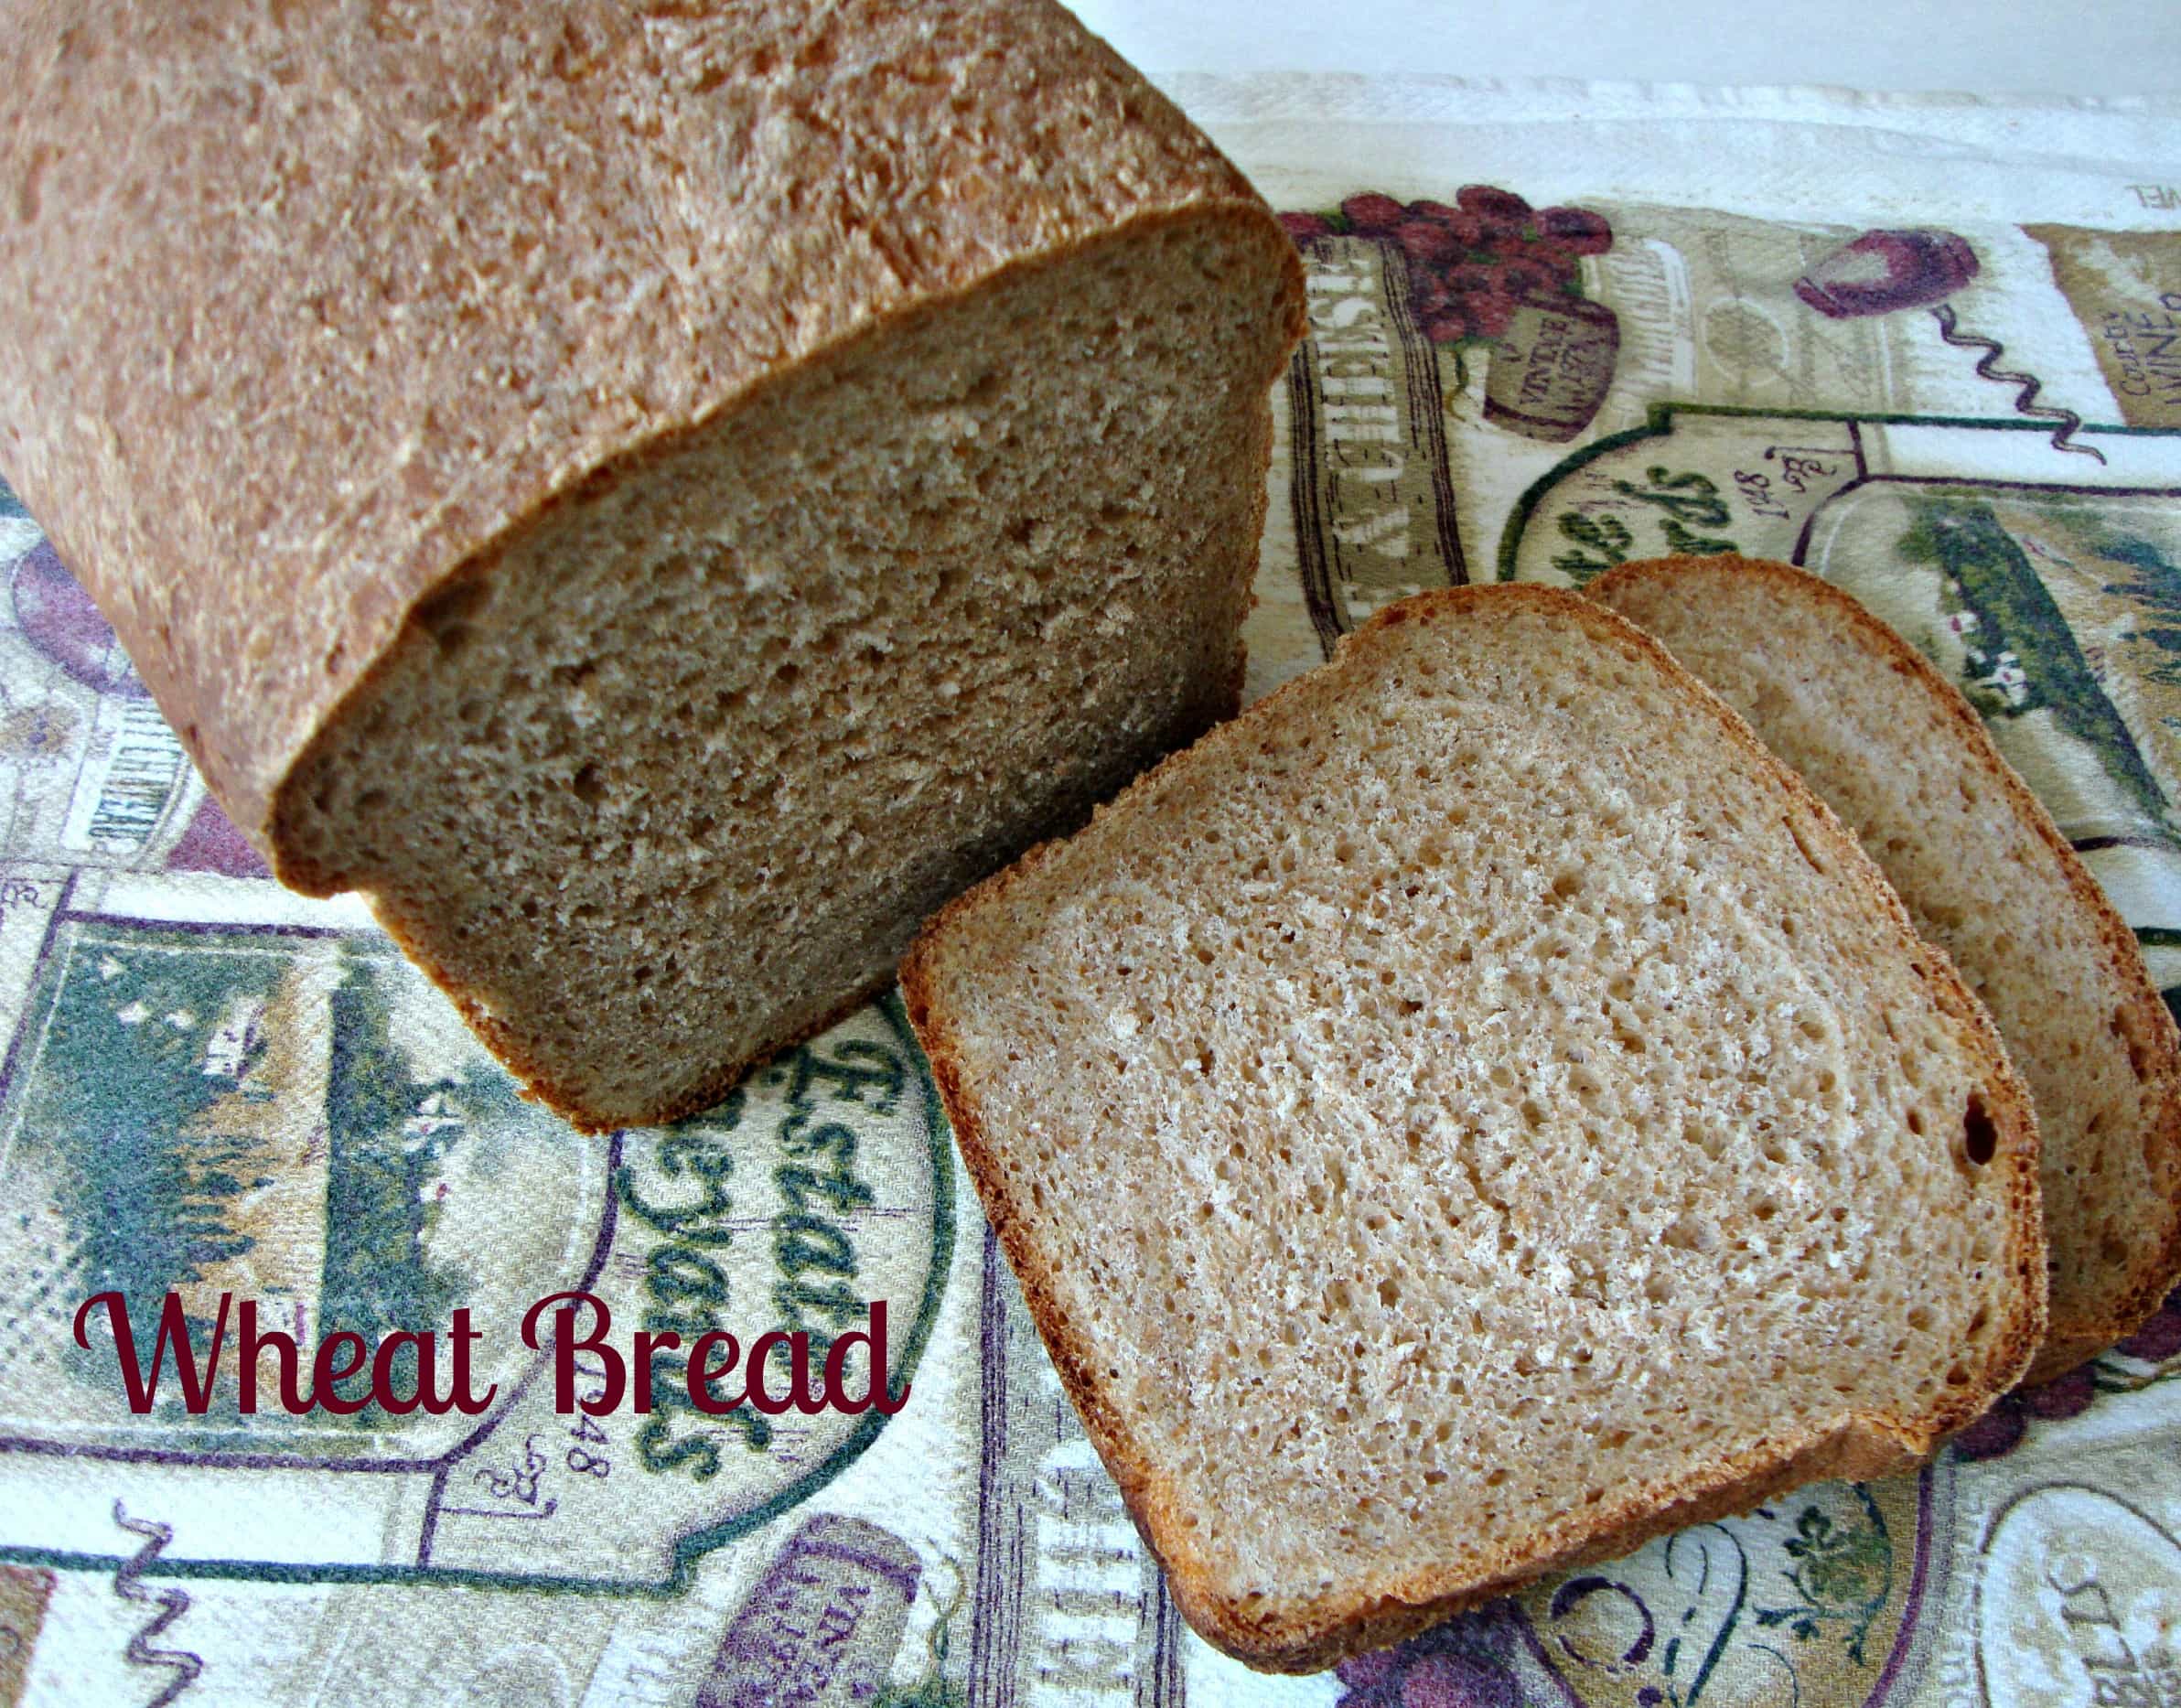 White Bread-simple and tasty - Chocolate Chocolate and More!